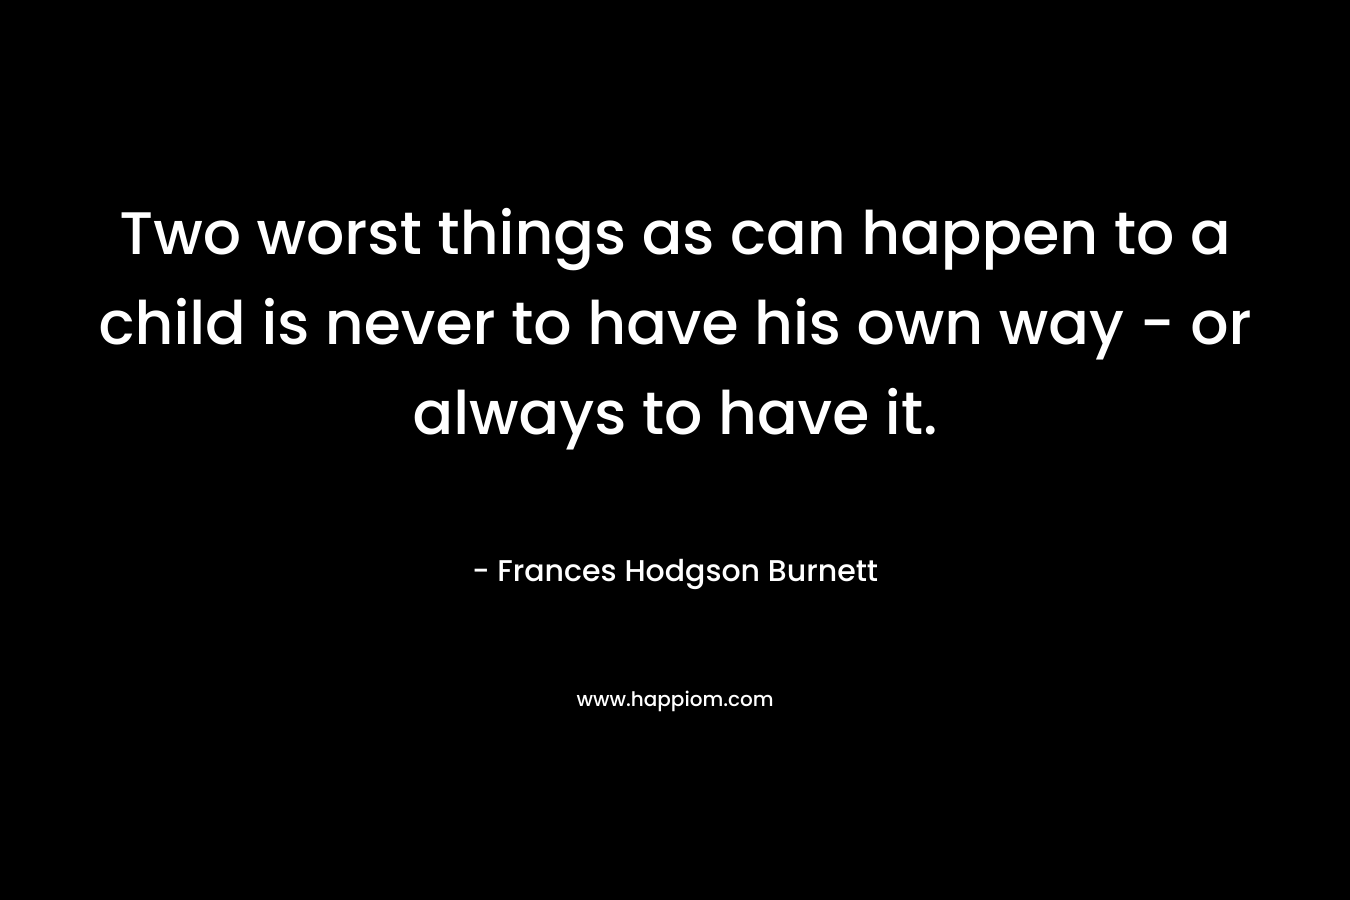 Two worst things as can happen to a child is never to have his own way - or always to have it.